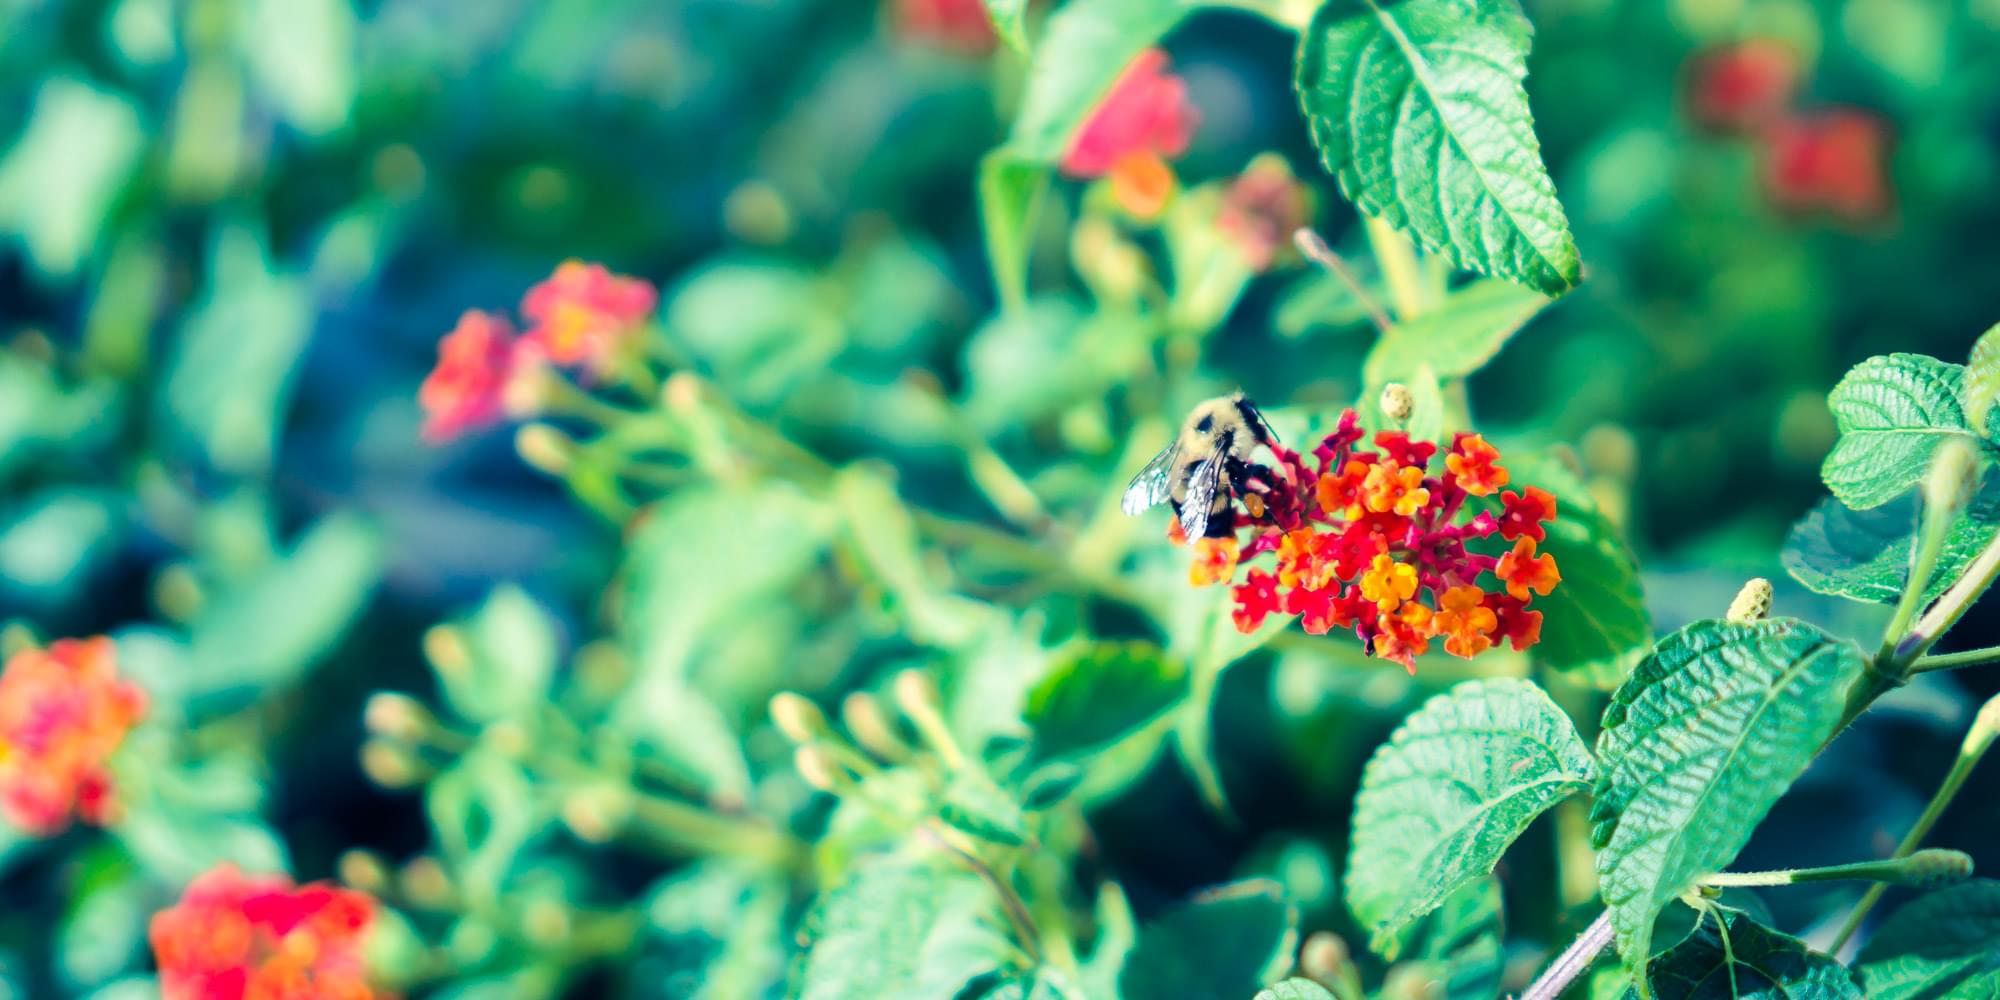 A close up of a bee collecting pollen from small bunch of orange and red flowers. Leaves fill the foreground and background.